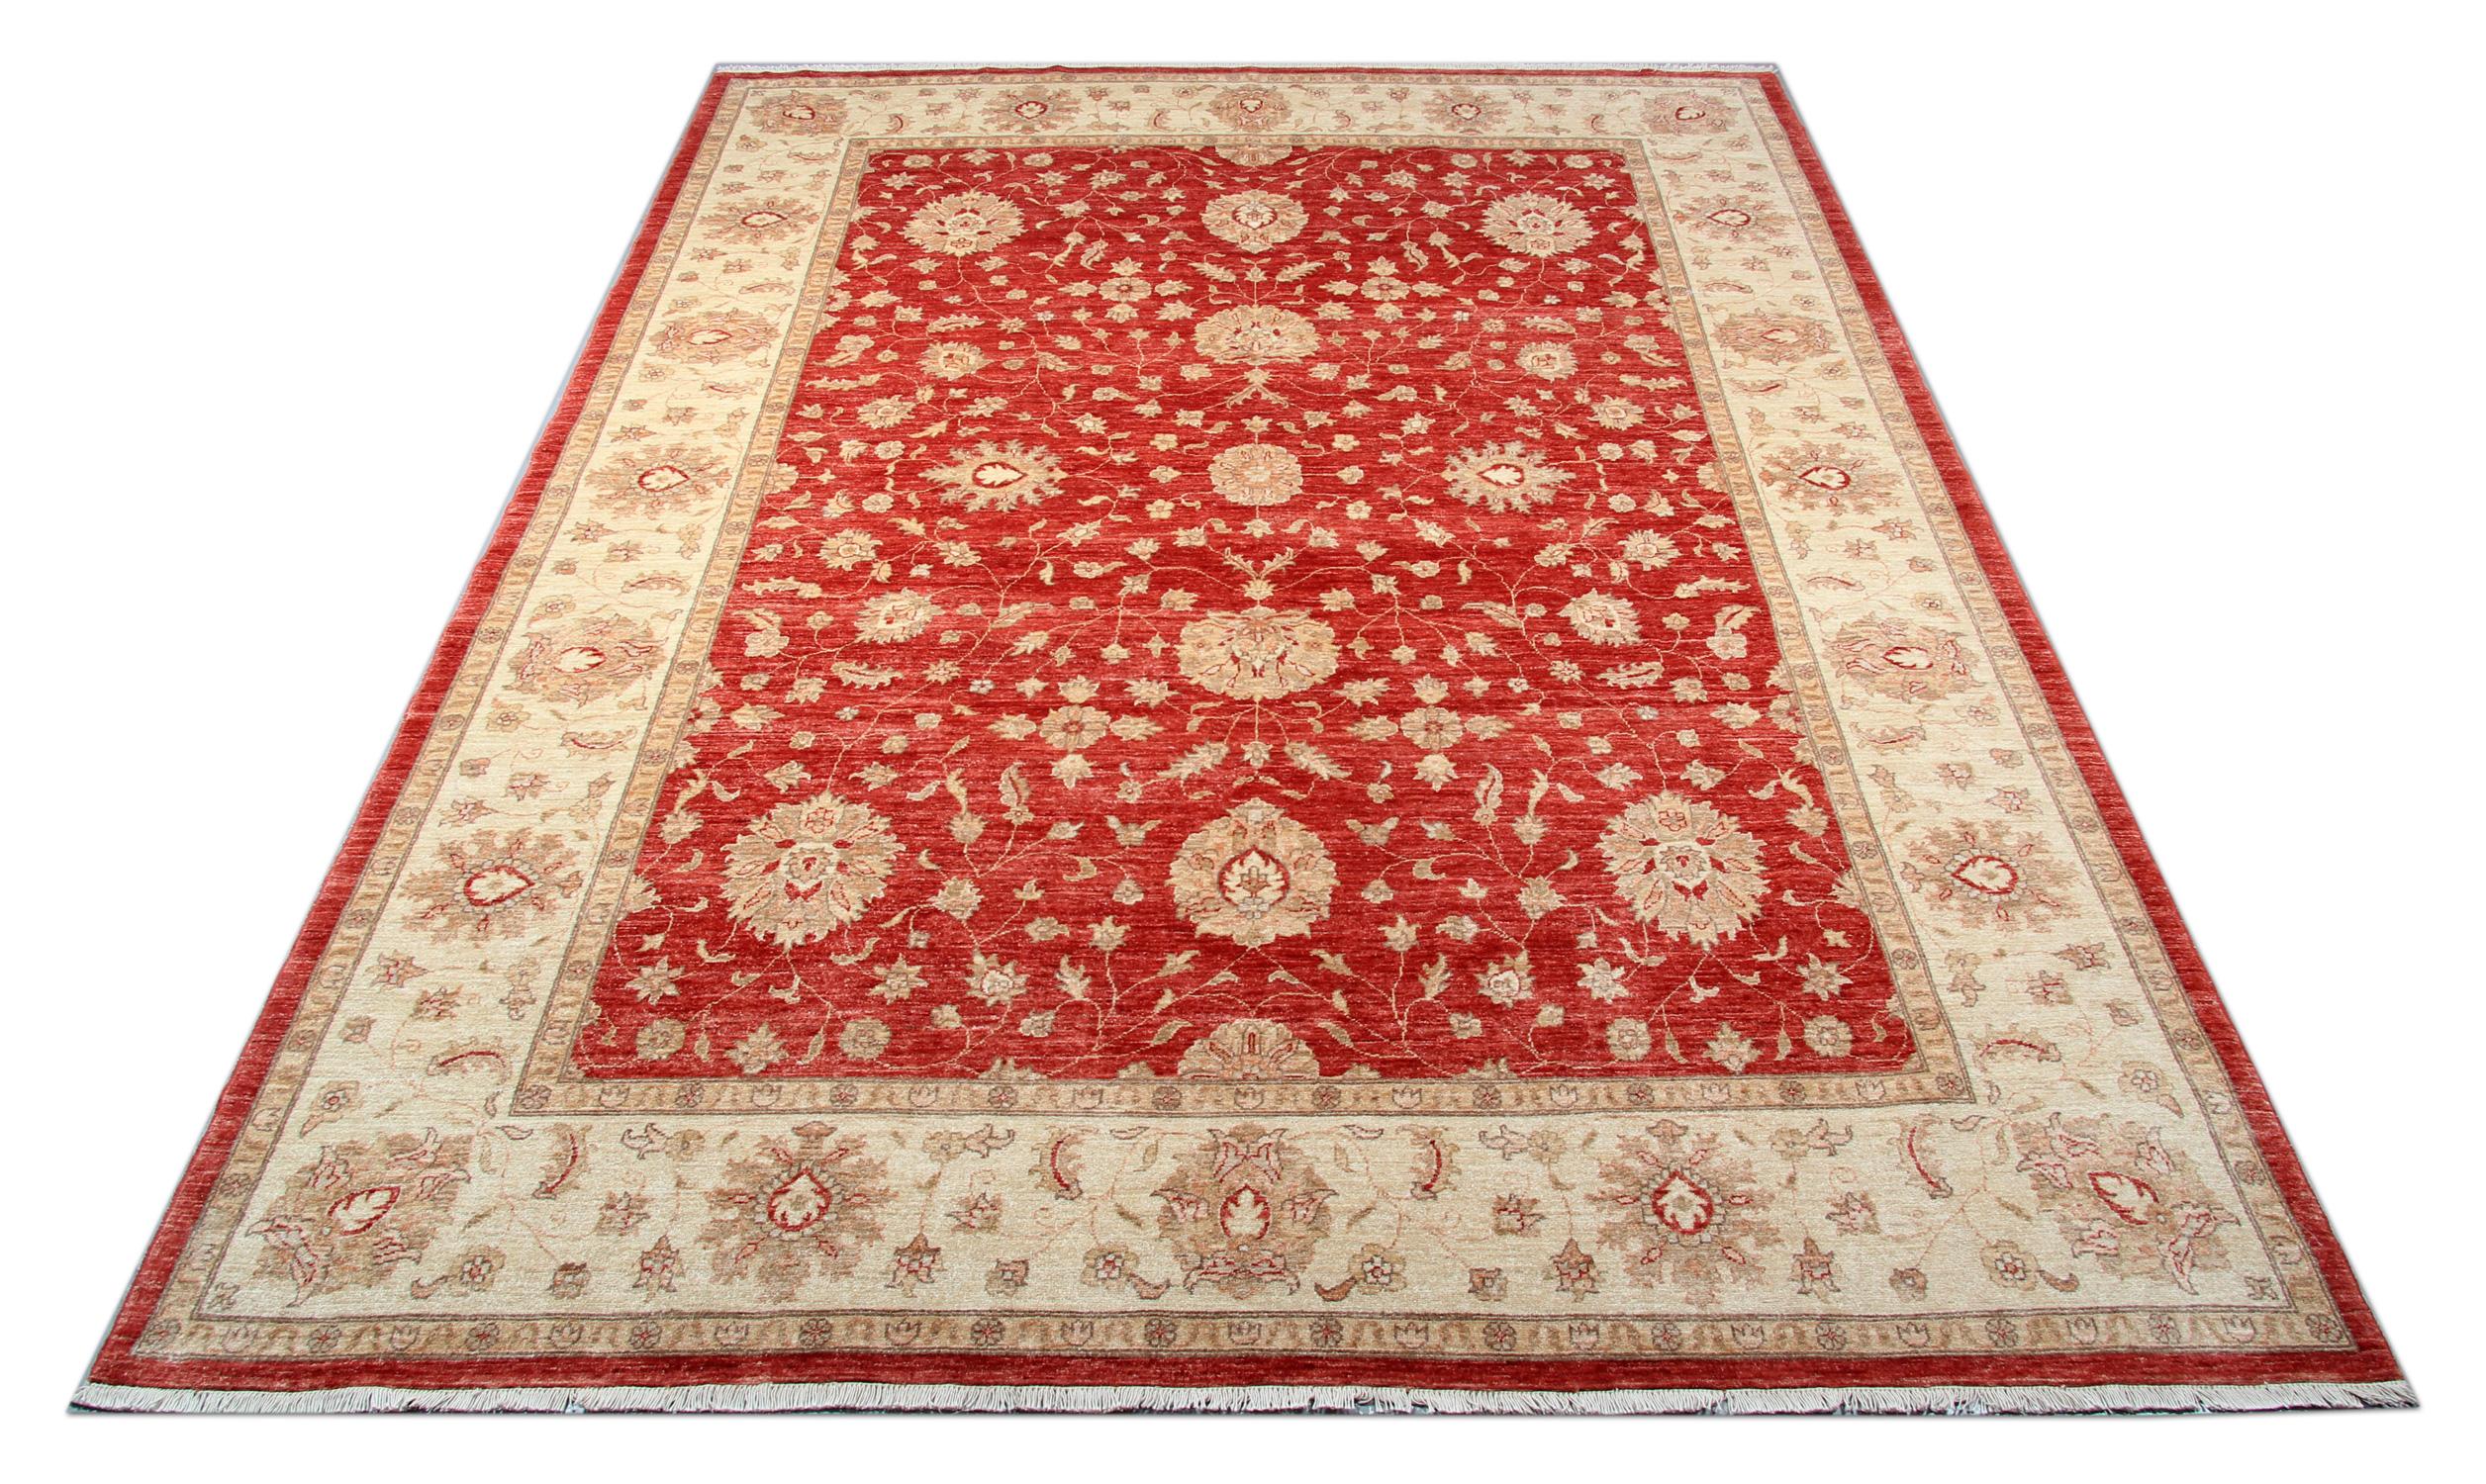 This traditional Ziegler rug is one of our more luxurious rugs made on looms by master weavers of Afghan rugs. This cream rug is made with or all handspun wool, the colours are produced from organic vegetable dyes. This carpet features an all-over